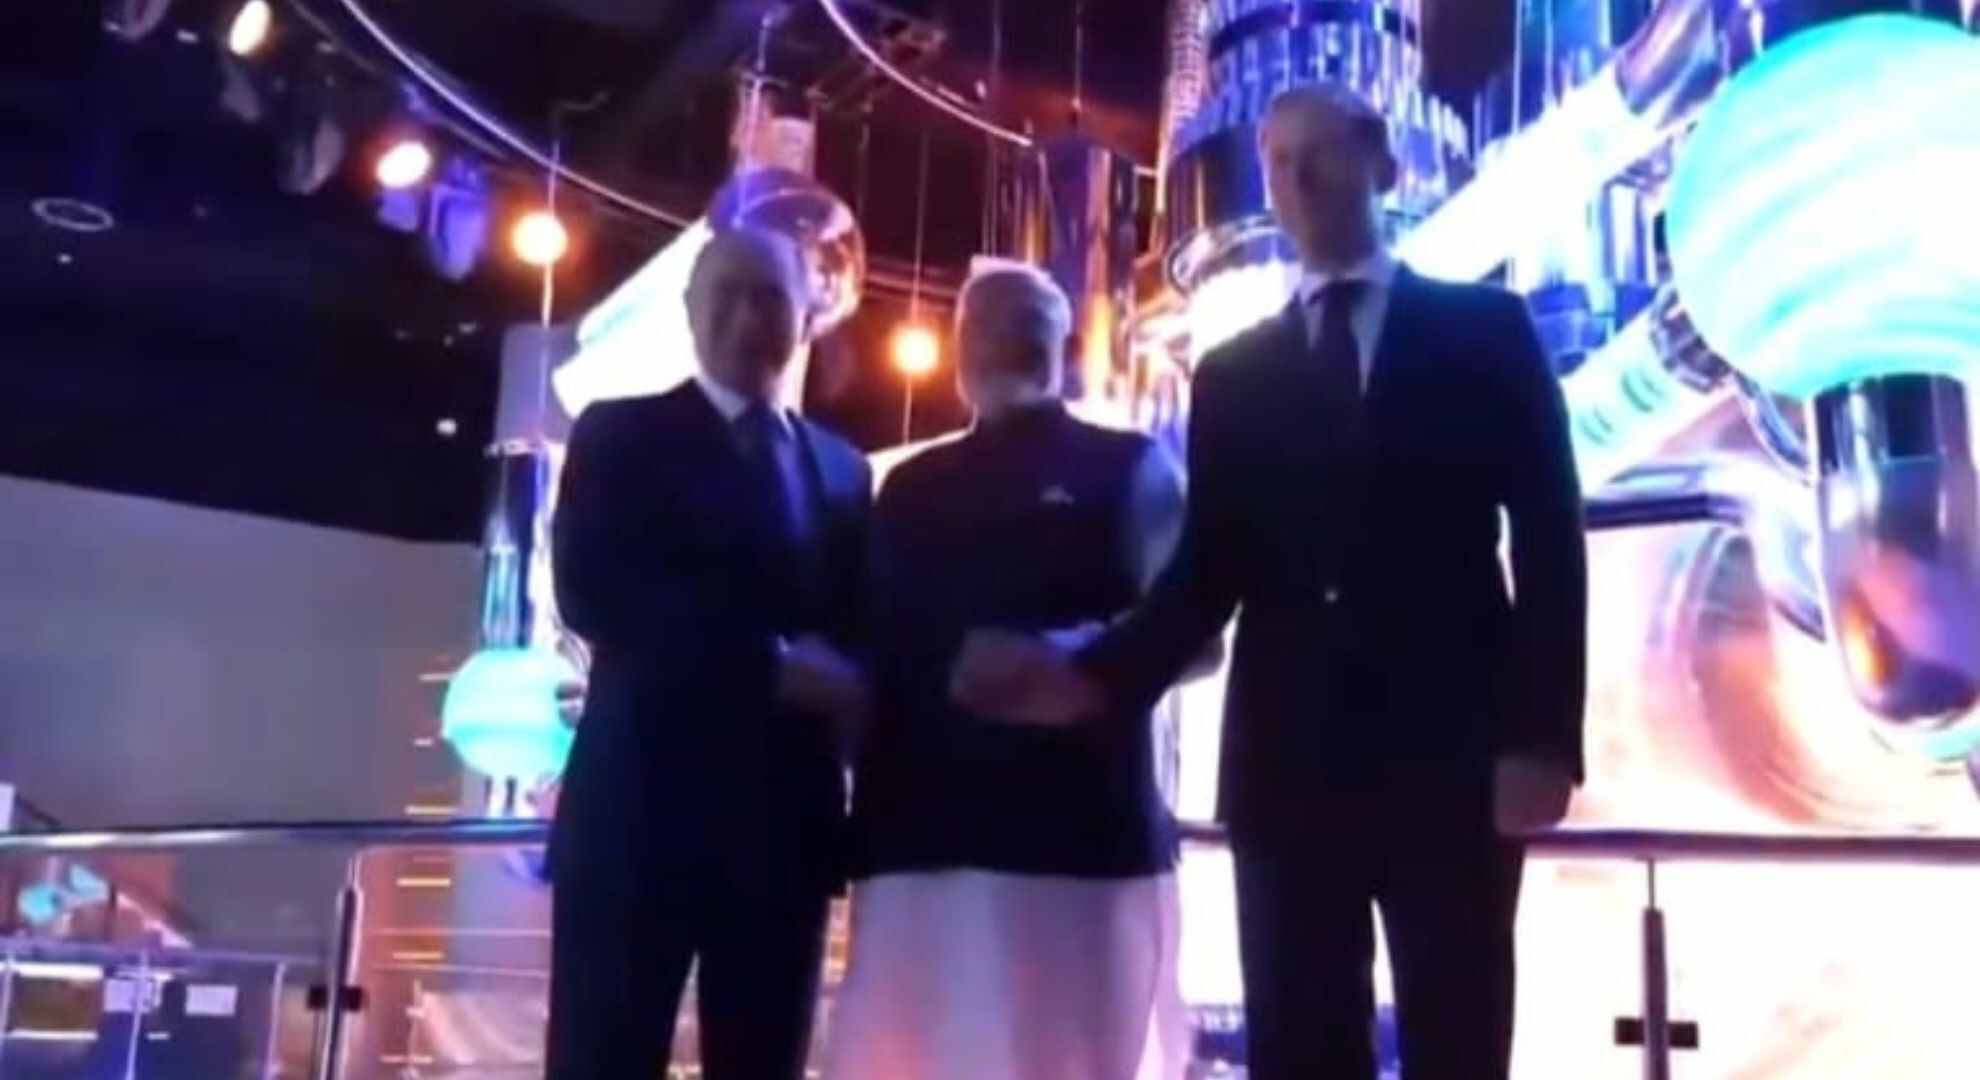 Prime Minister Narendra Modi Join Russian Leaders At ATOM Pavilion In Moscow’s VDNKh Exhibition